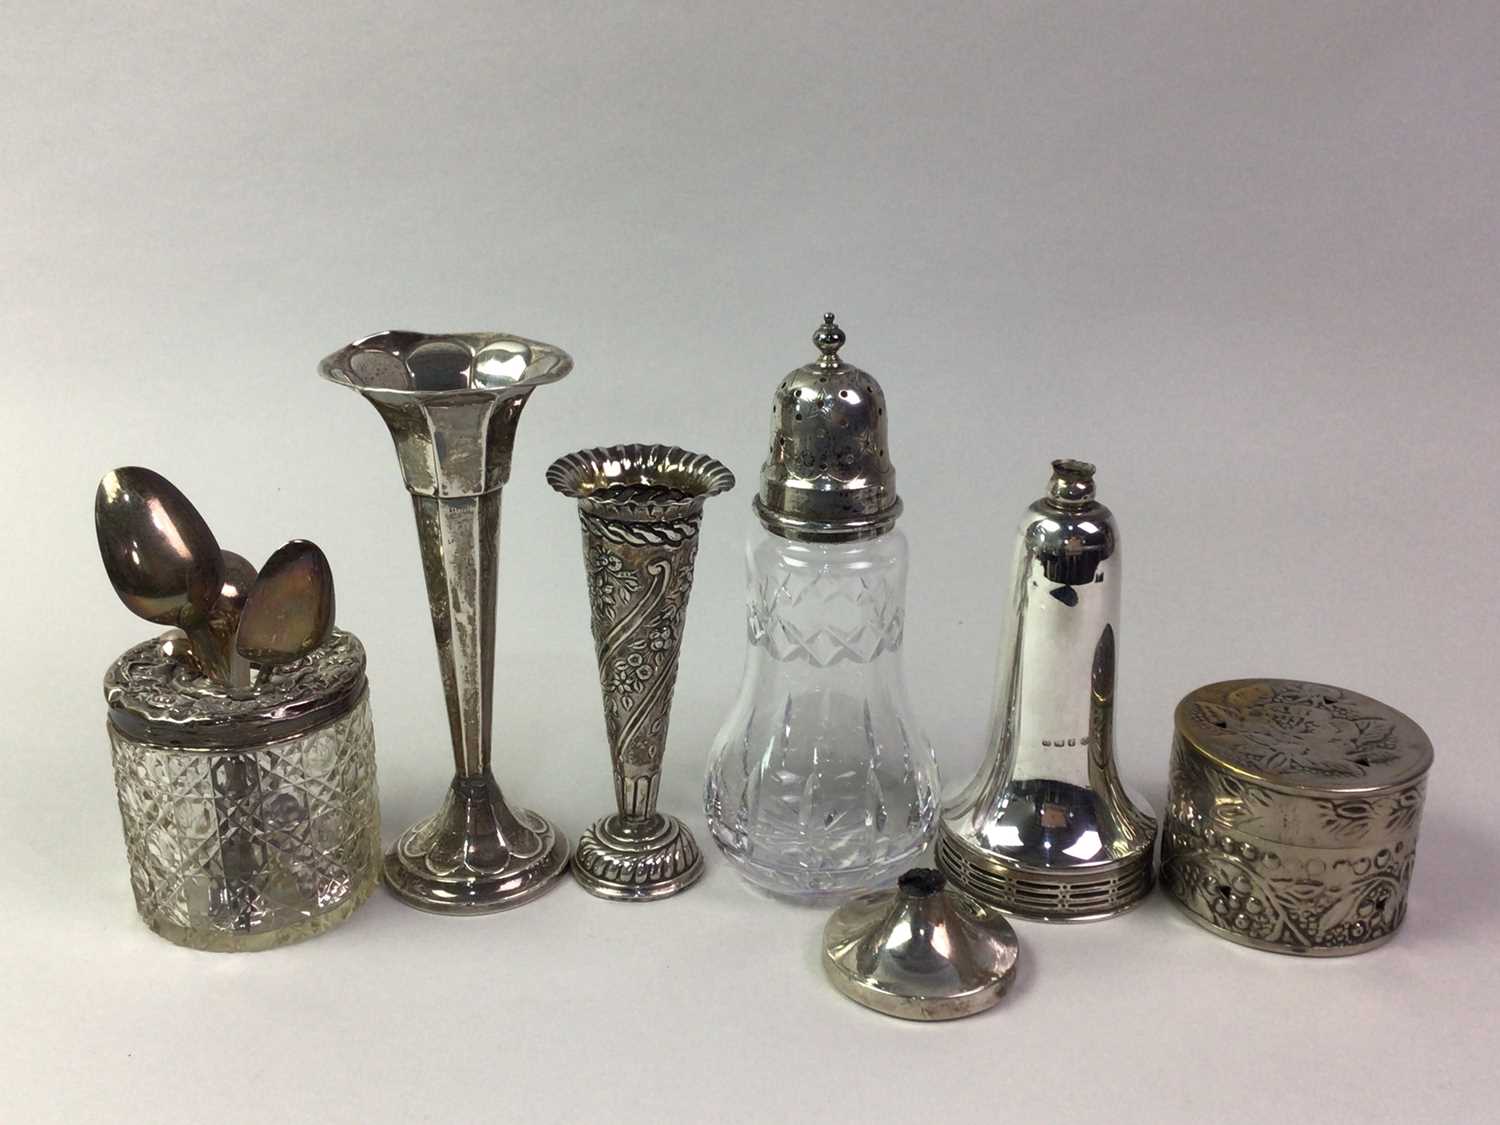 THREE SILVER SOLIFLEUR VASES, AND OTHER ITEMS - Image 2 of 2